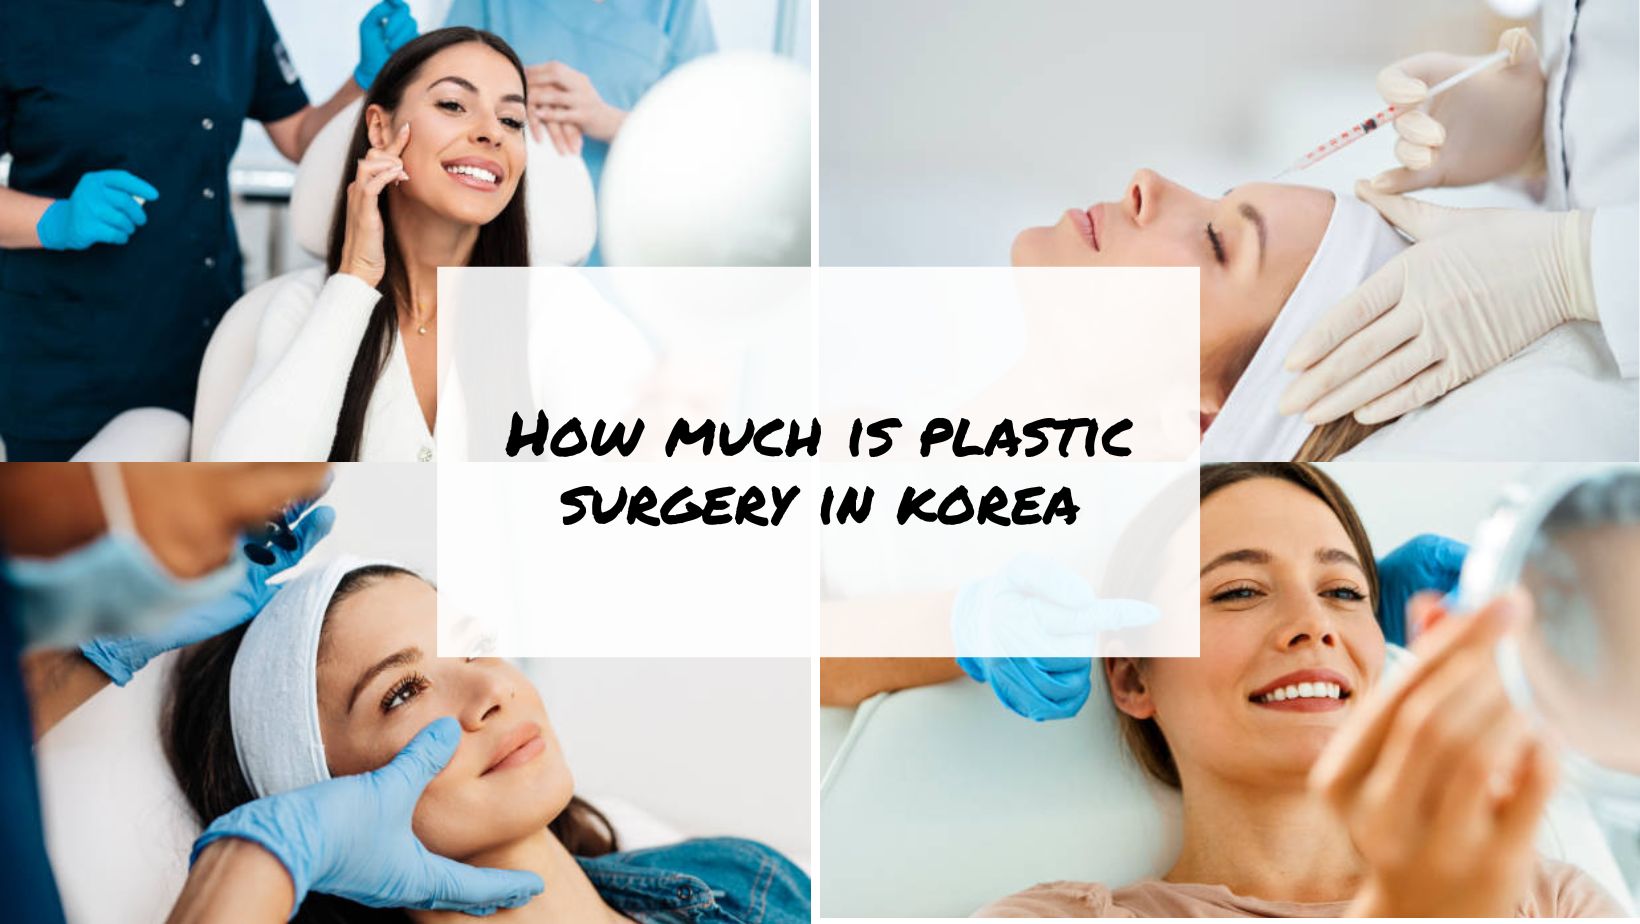 How much is plastic surgery in korea